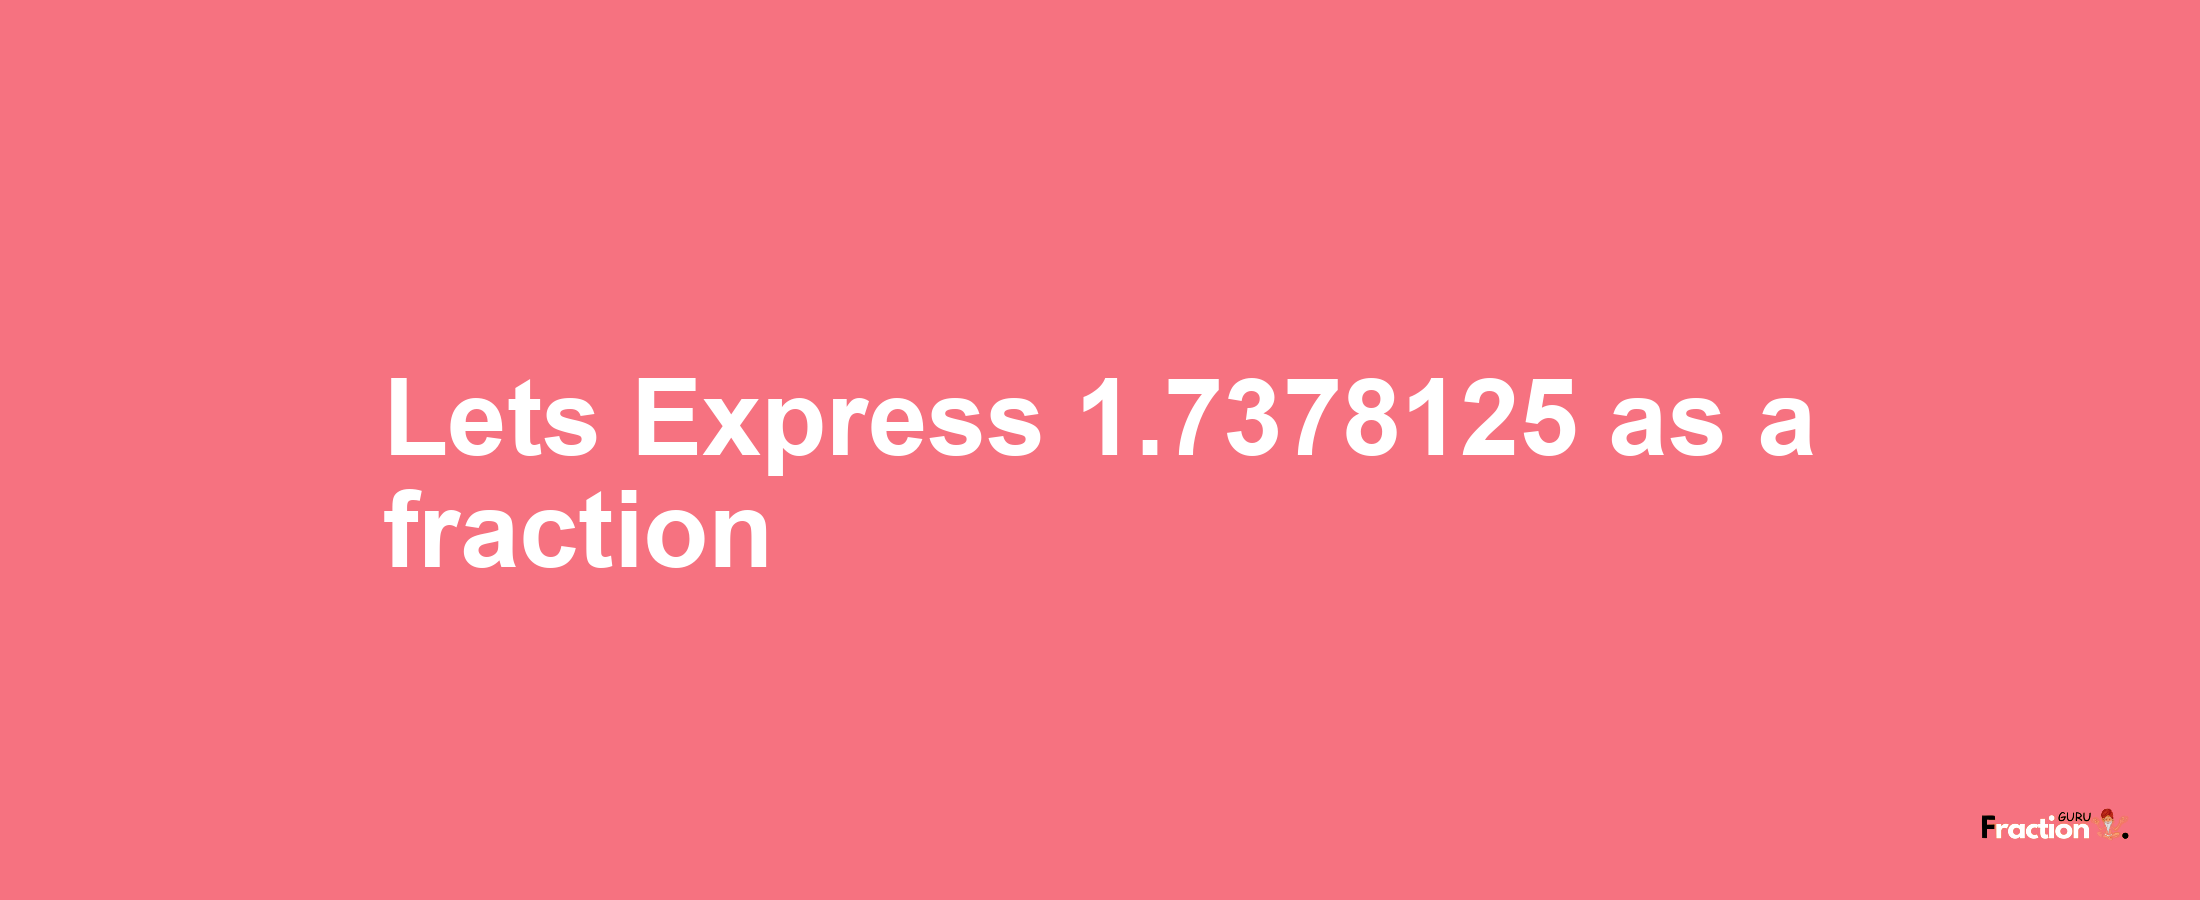 Lets Express 1.7378125 as afraction